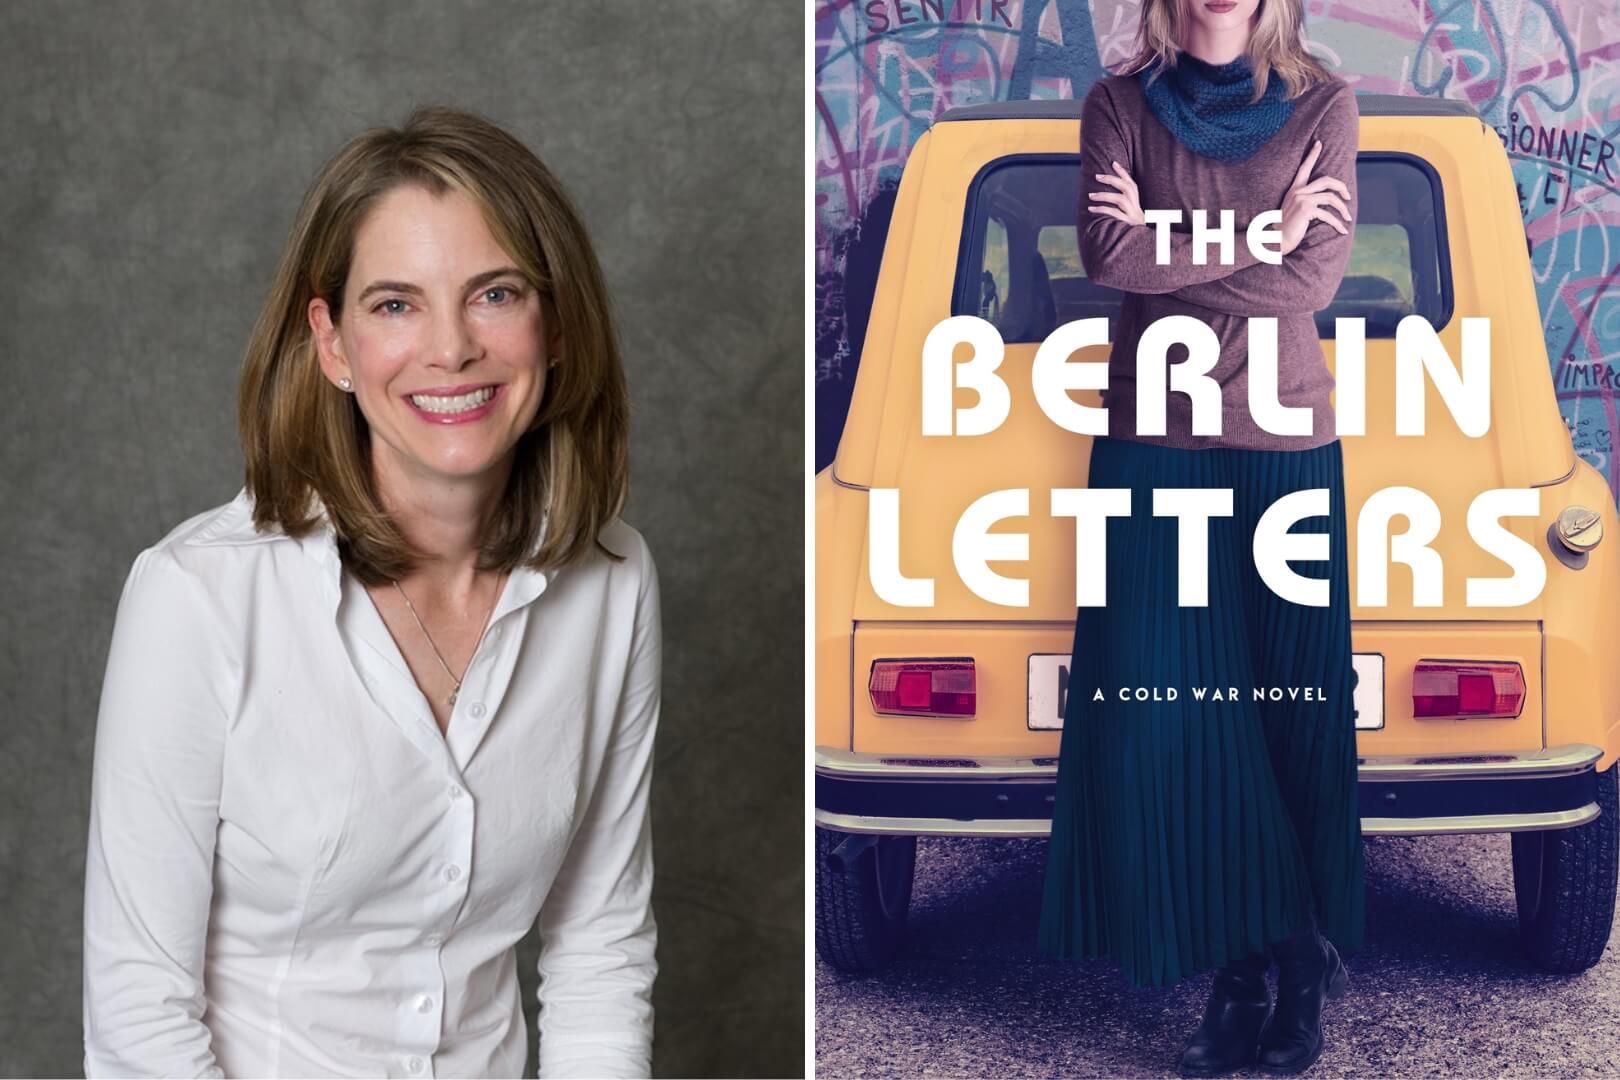 Q&A with Katherine Reay, Author of The Berlin Letters